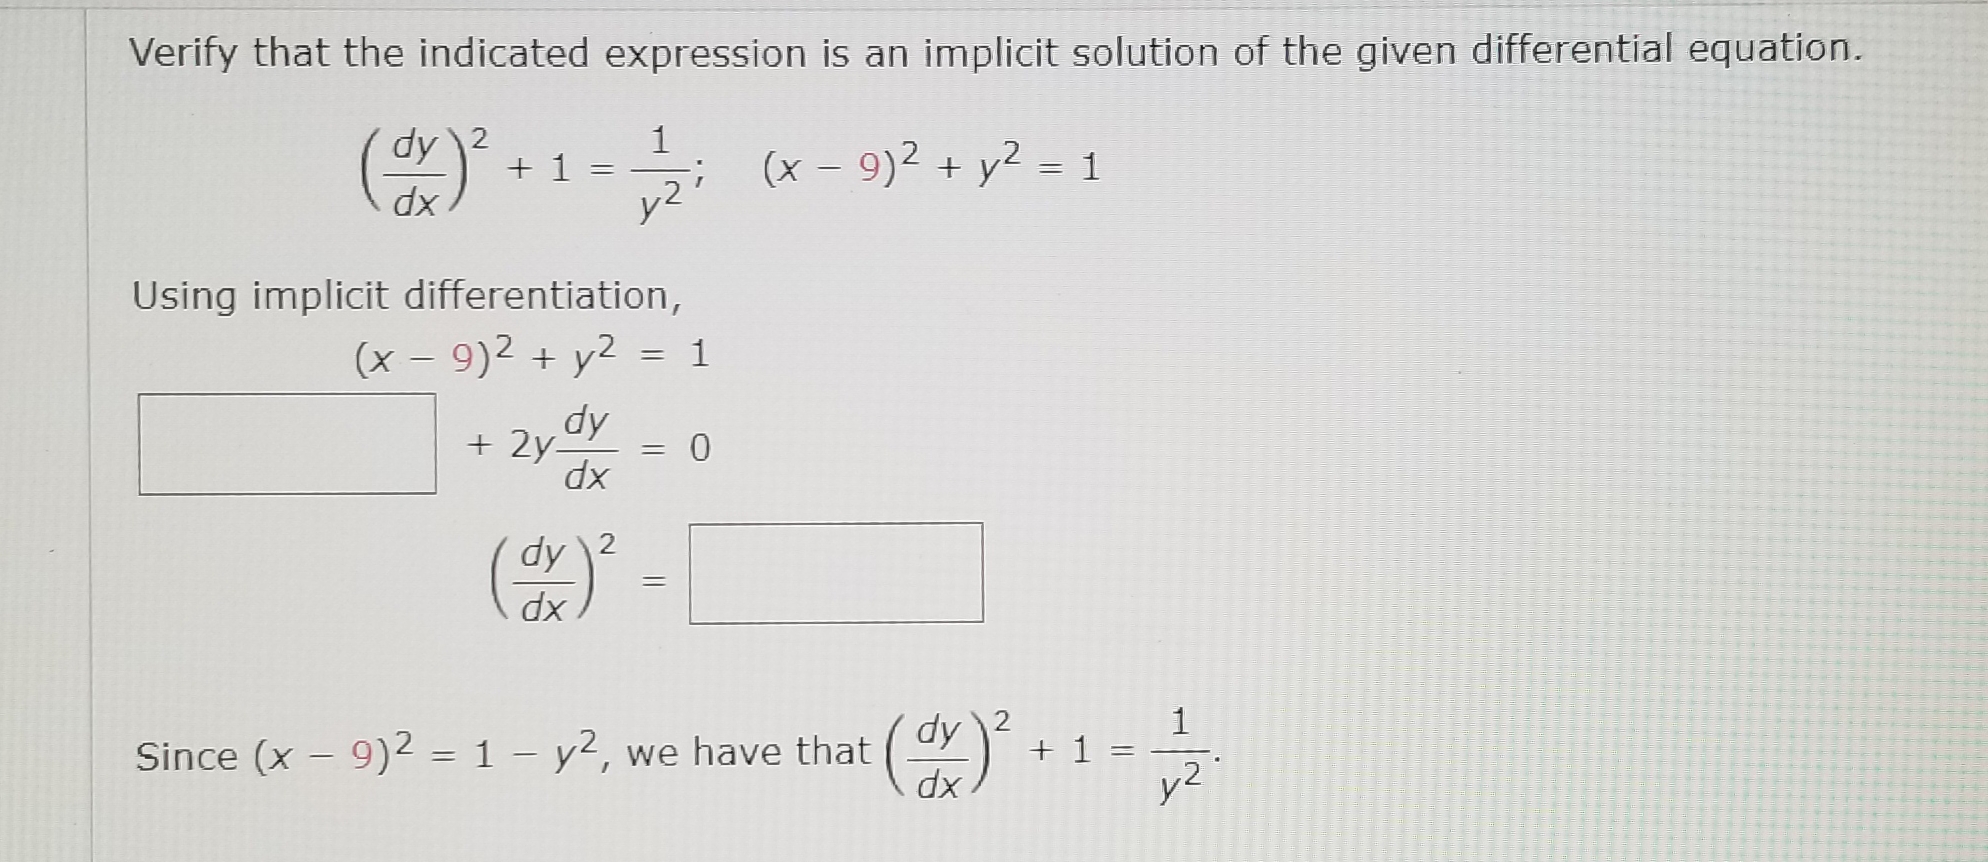 Verify that the indicated expression is an implicit solution of the given differential equation.
() -1-
dy 2
1
; (x - 9)2 + y2 = 1
||
dx
と2
Using implicit differentiation,
(x – 9)2 + y2 = 1
%3D
%3D
dx
dy \2
dx
Since (x – 9)2 = 1 – y2, we have that
1
+ 1 =
y2
dy 2
%3D
xp
